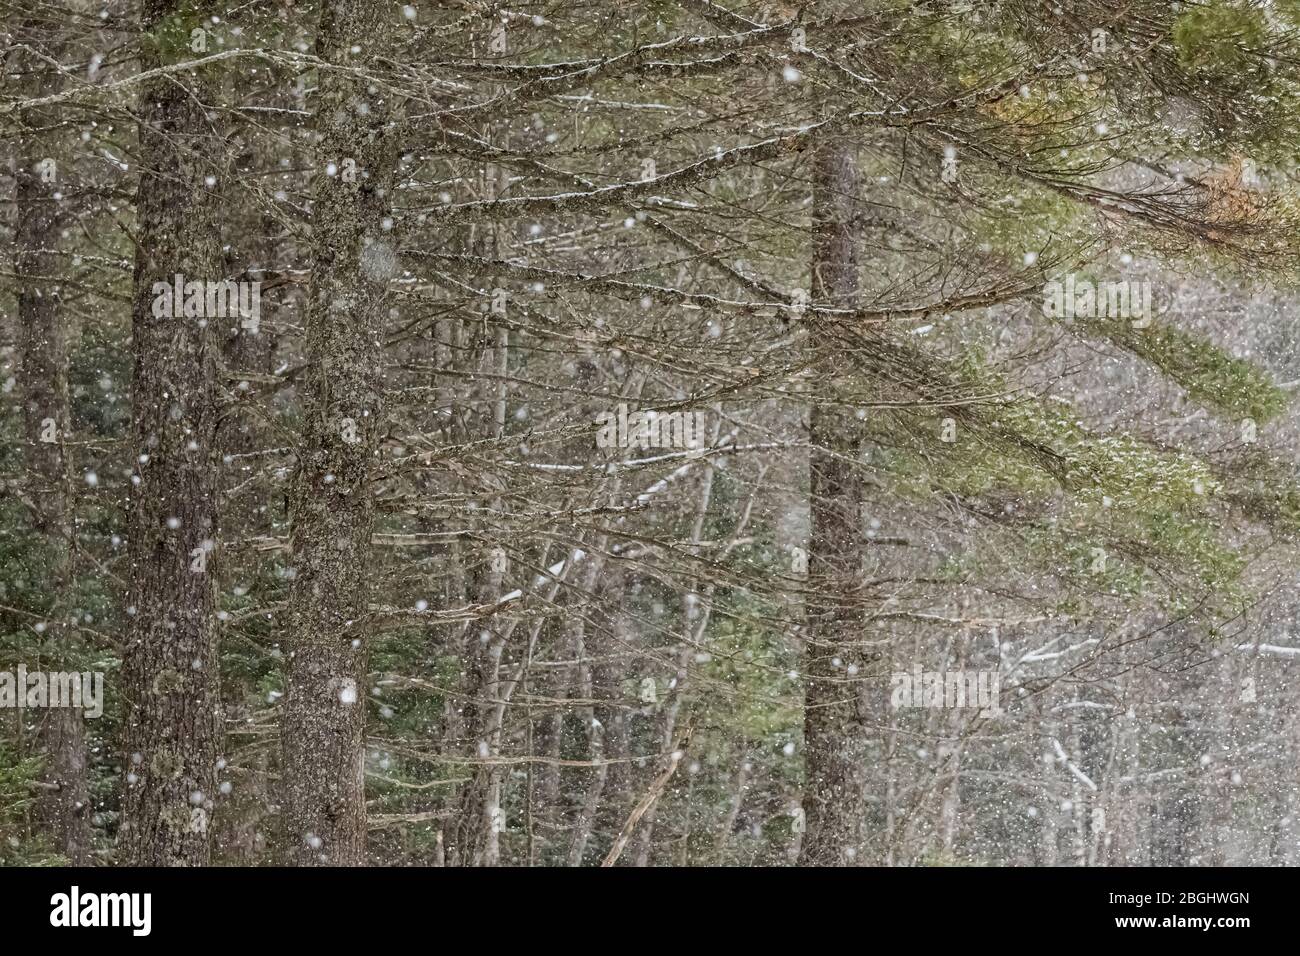 Snow falling on Eastern White Pines, Pinus strobus, on a winter day near Whitefish Point in the Upper Peninsula, Michigan, USA Stock Photo